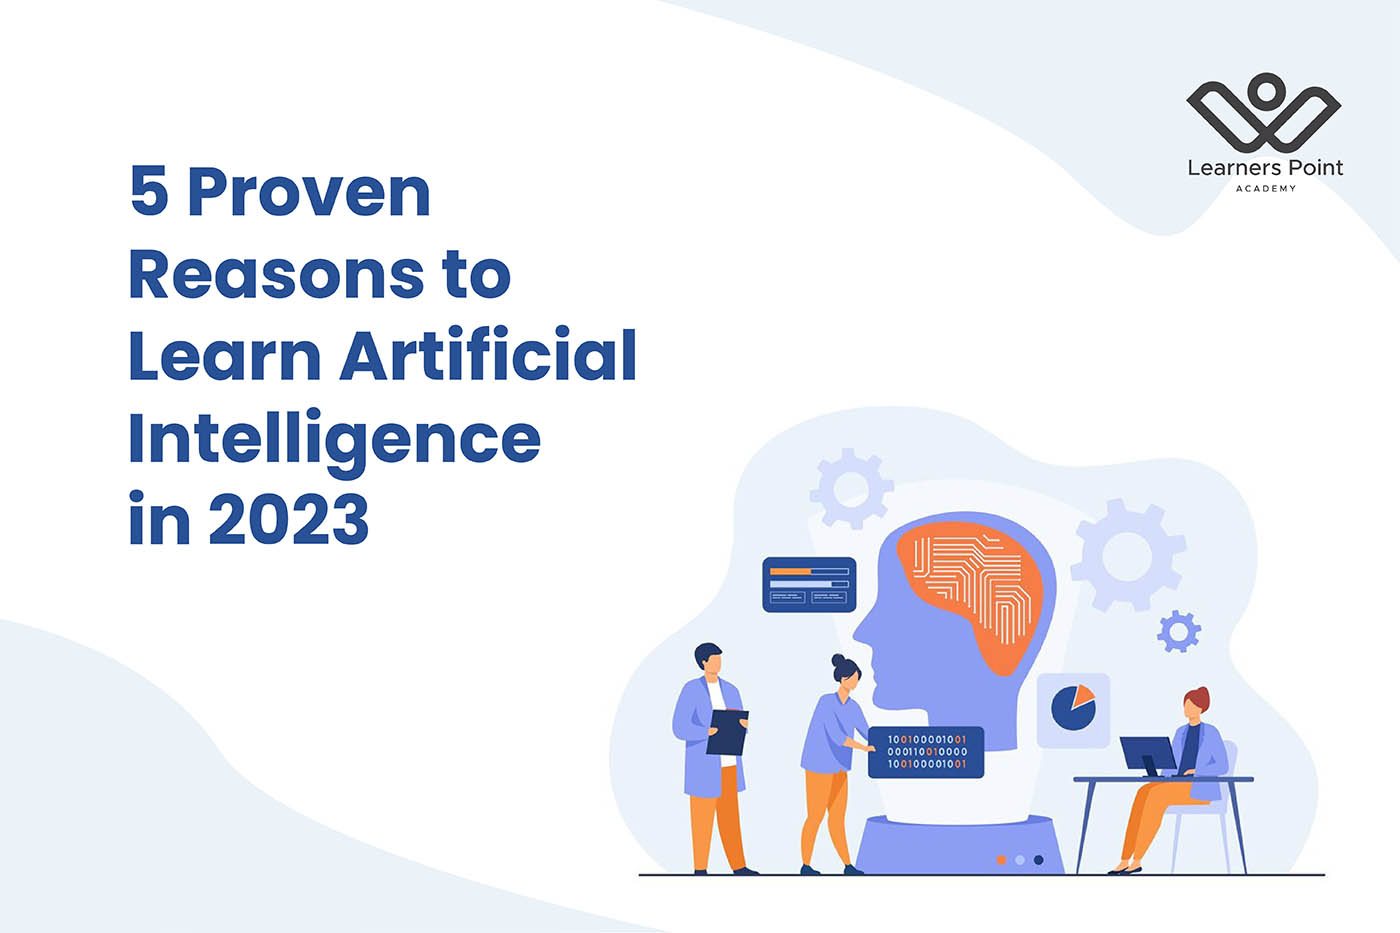 5 Proven Reasons to Learn Artificial Intelligence in 2023